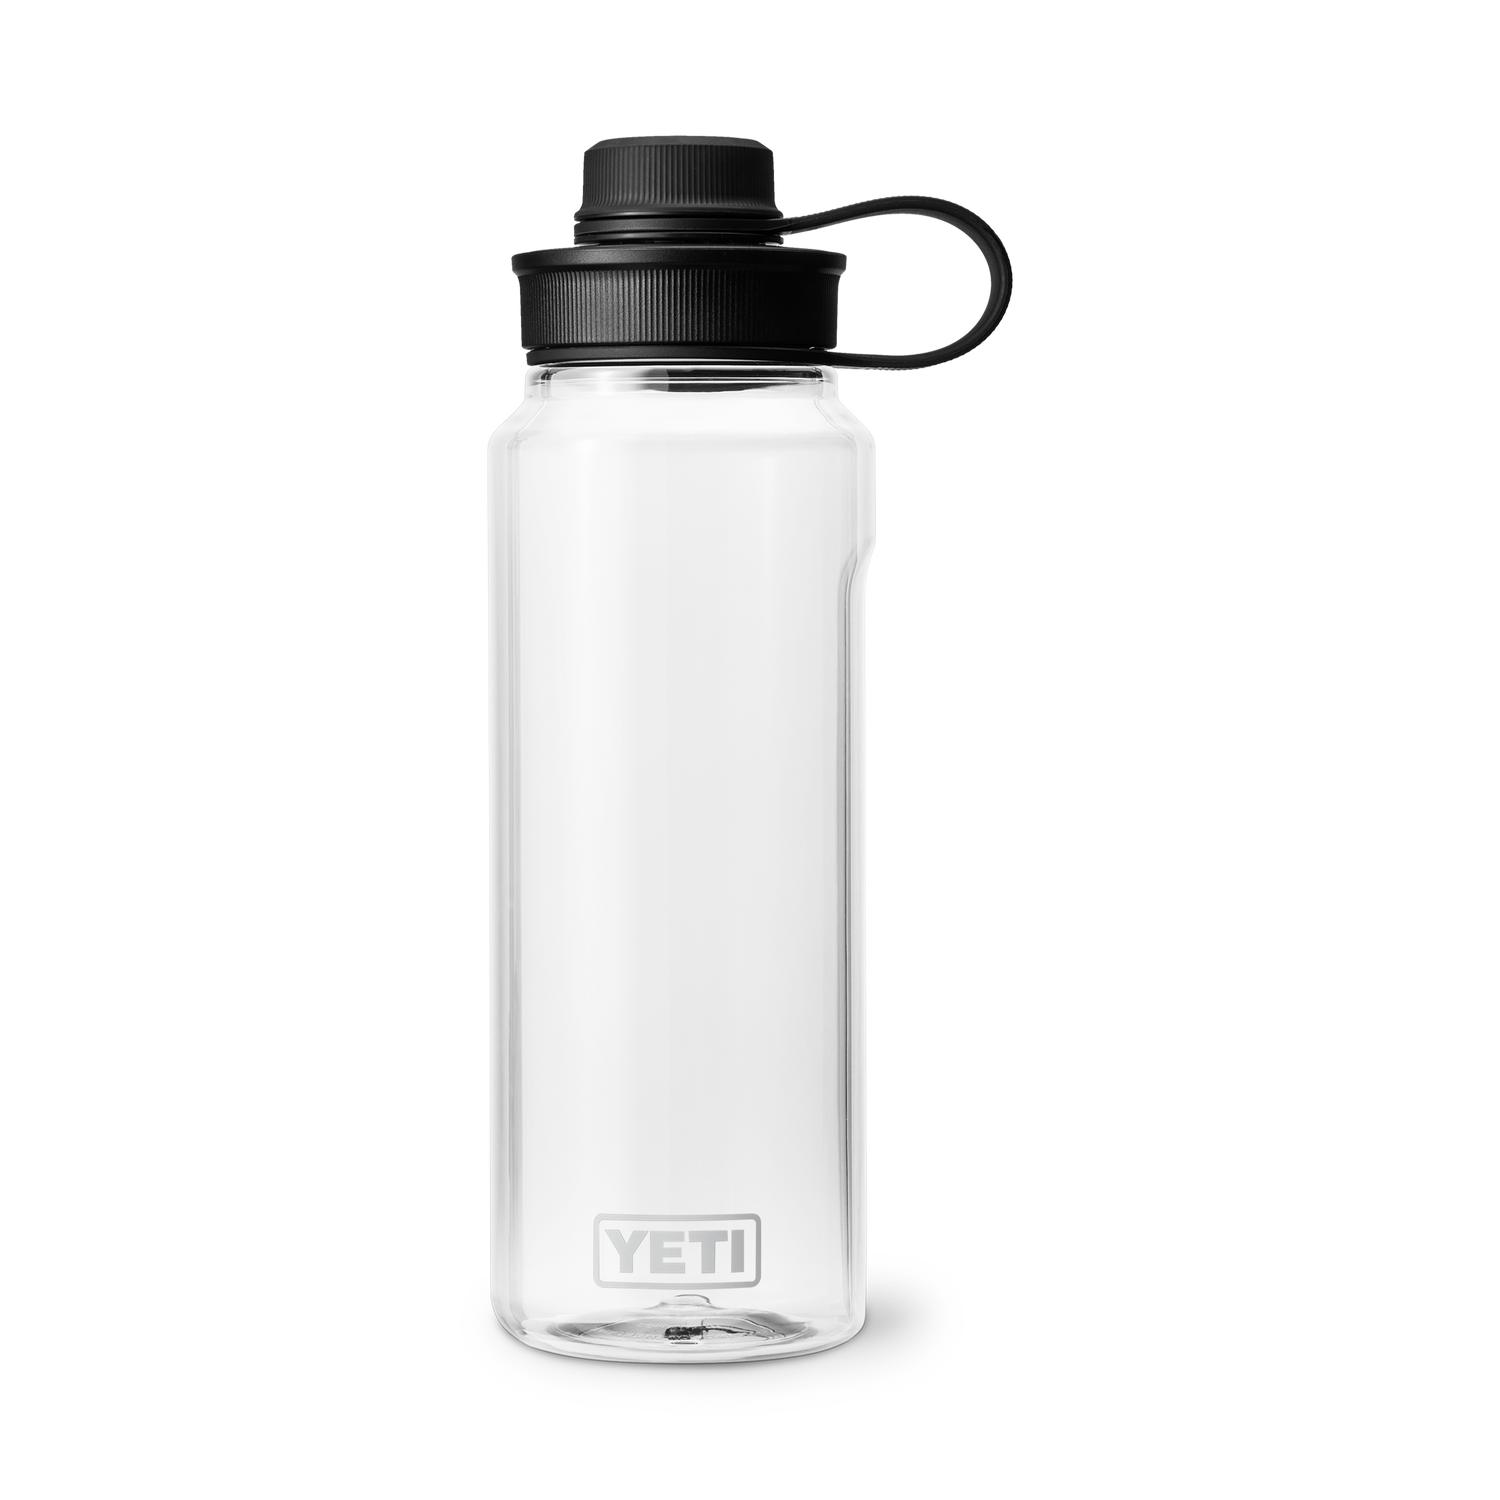 site_studio_Drinkware_Yonder_Tether_Accs_1L_Clear_Front_0763_Primary_B_2400x2400.png